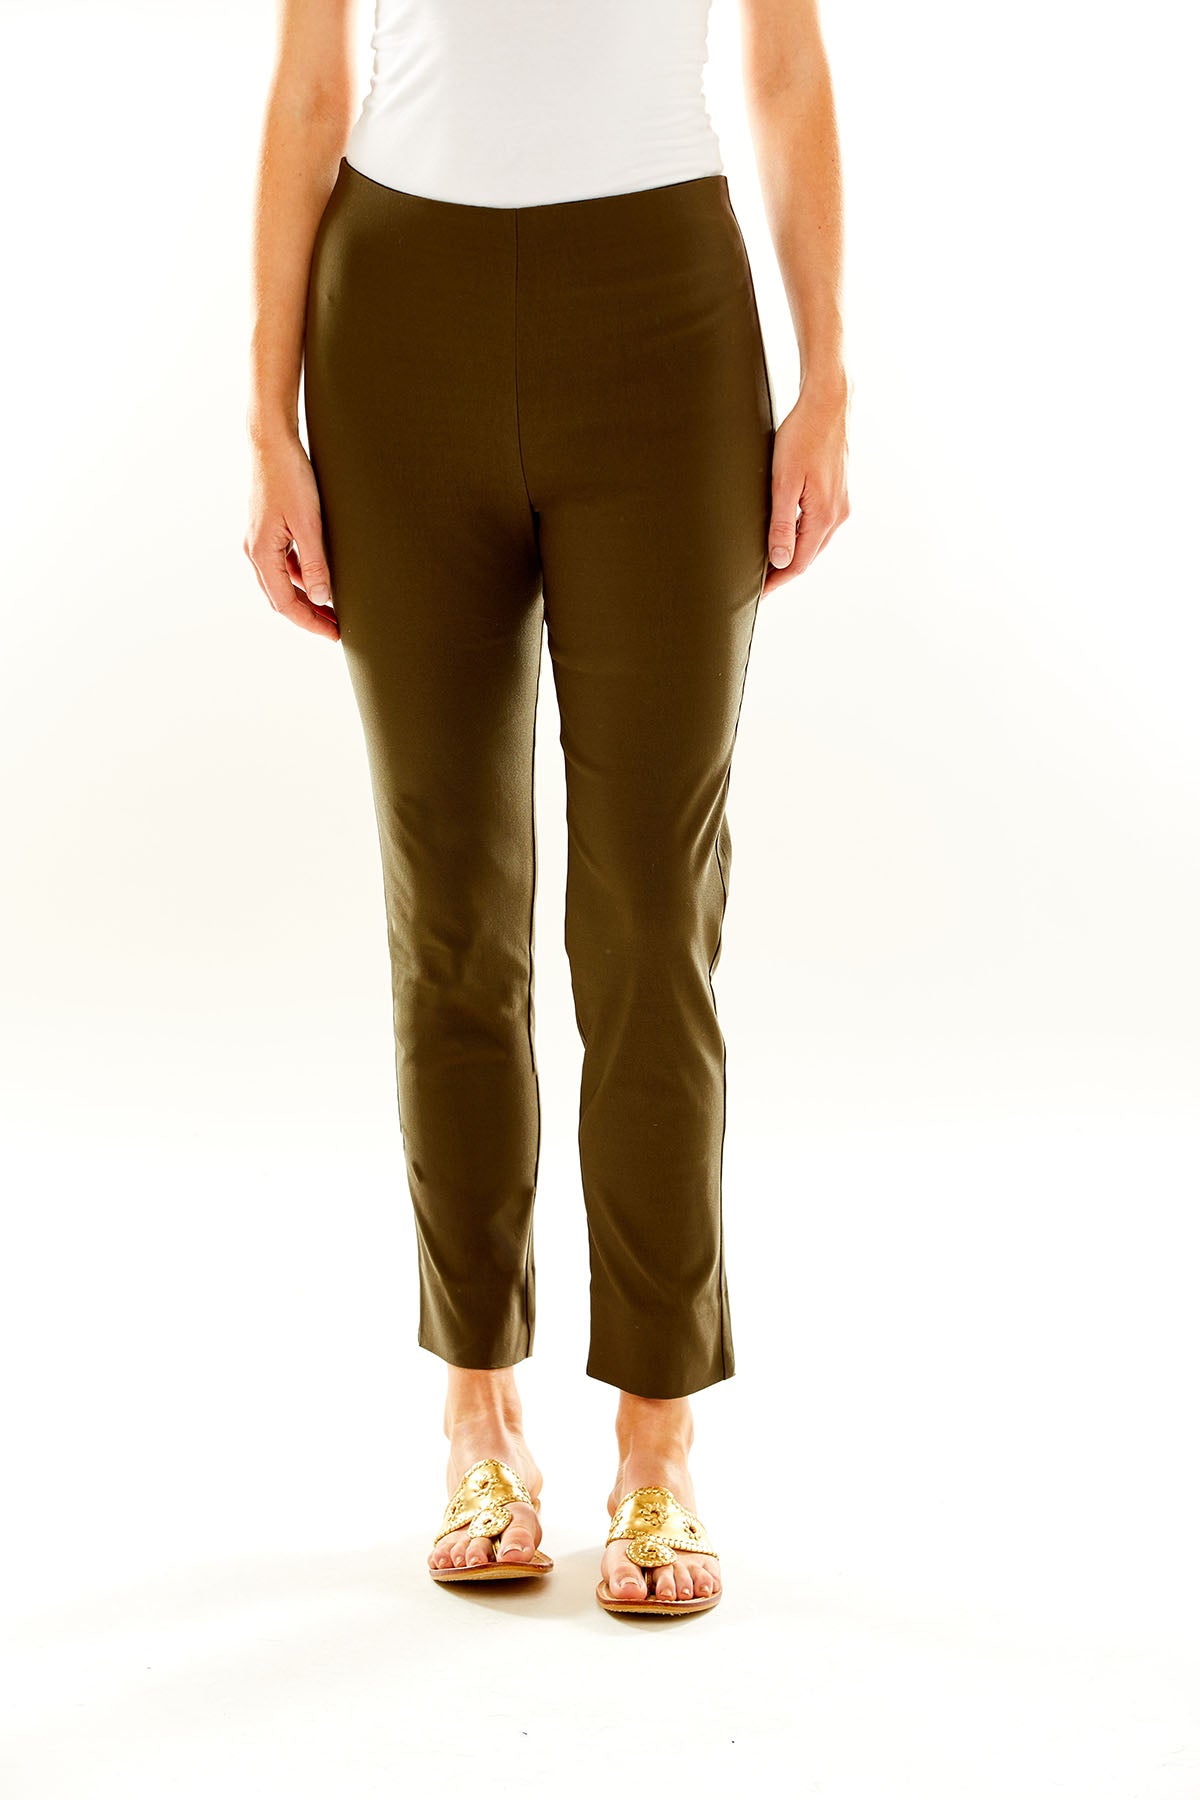 The best-selling Sara Campbell Sheri Pants in olive